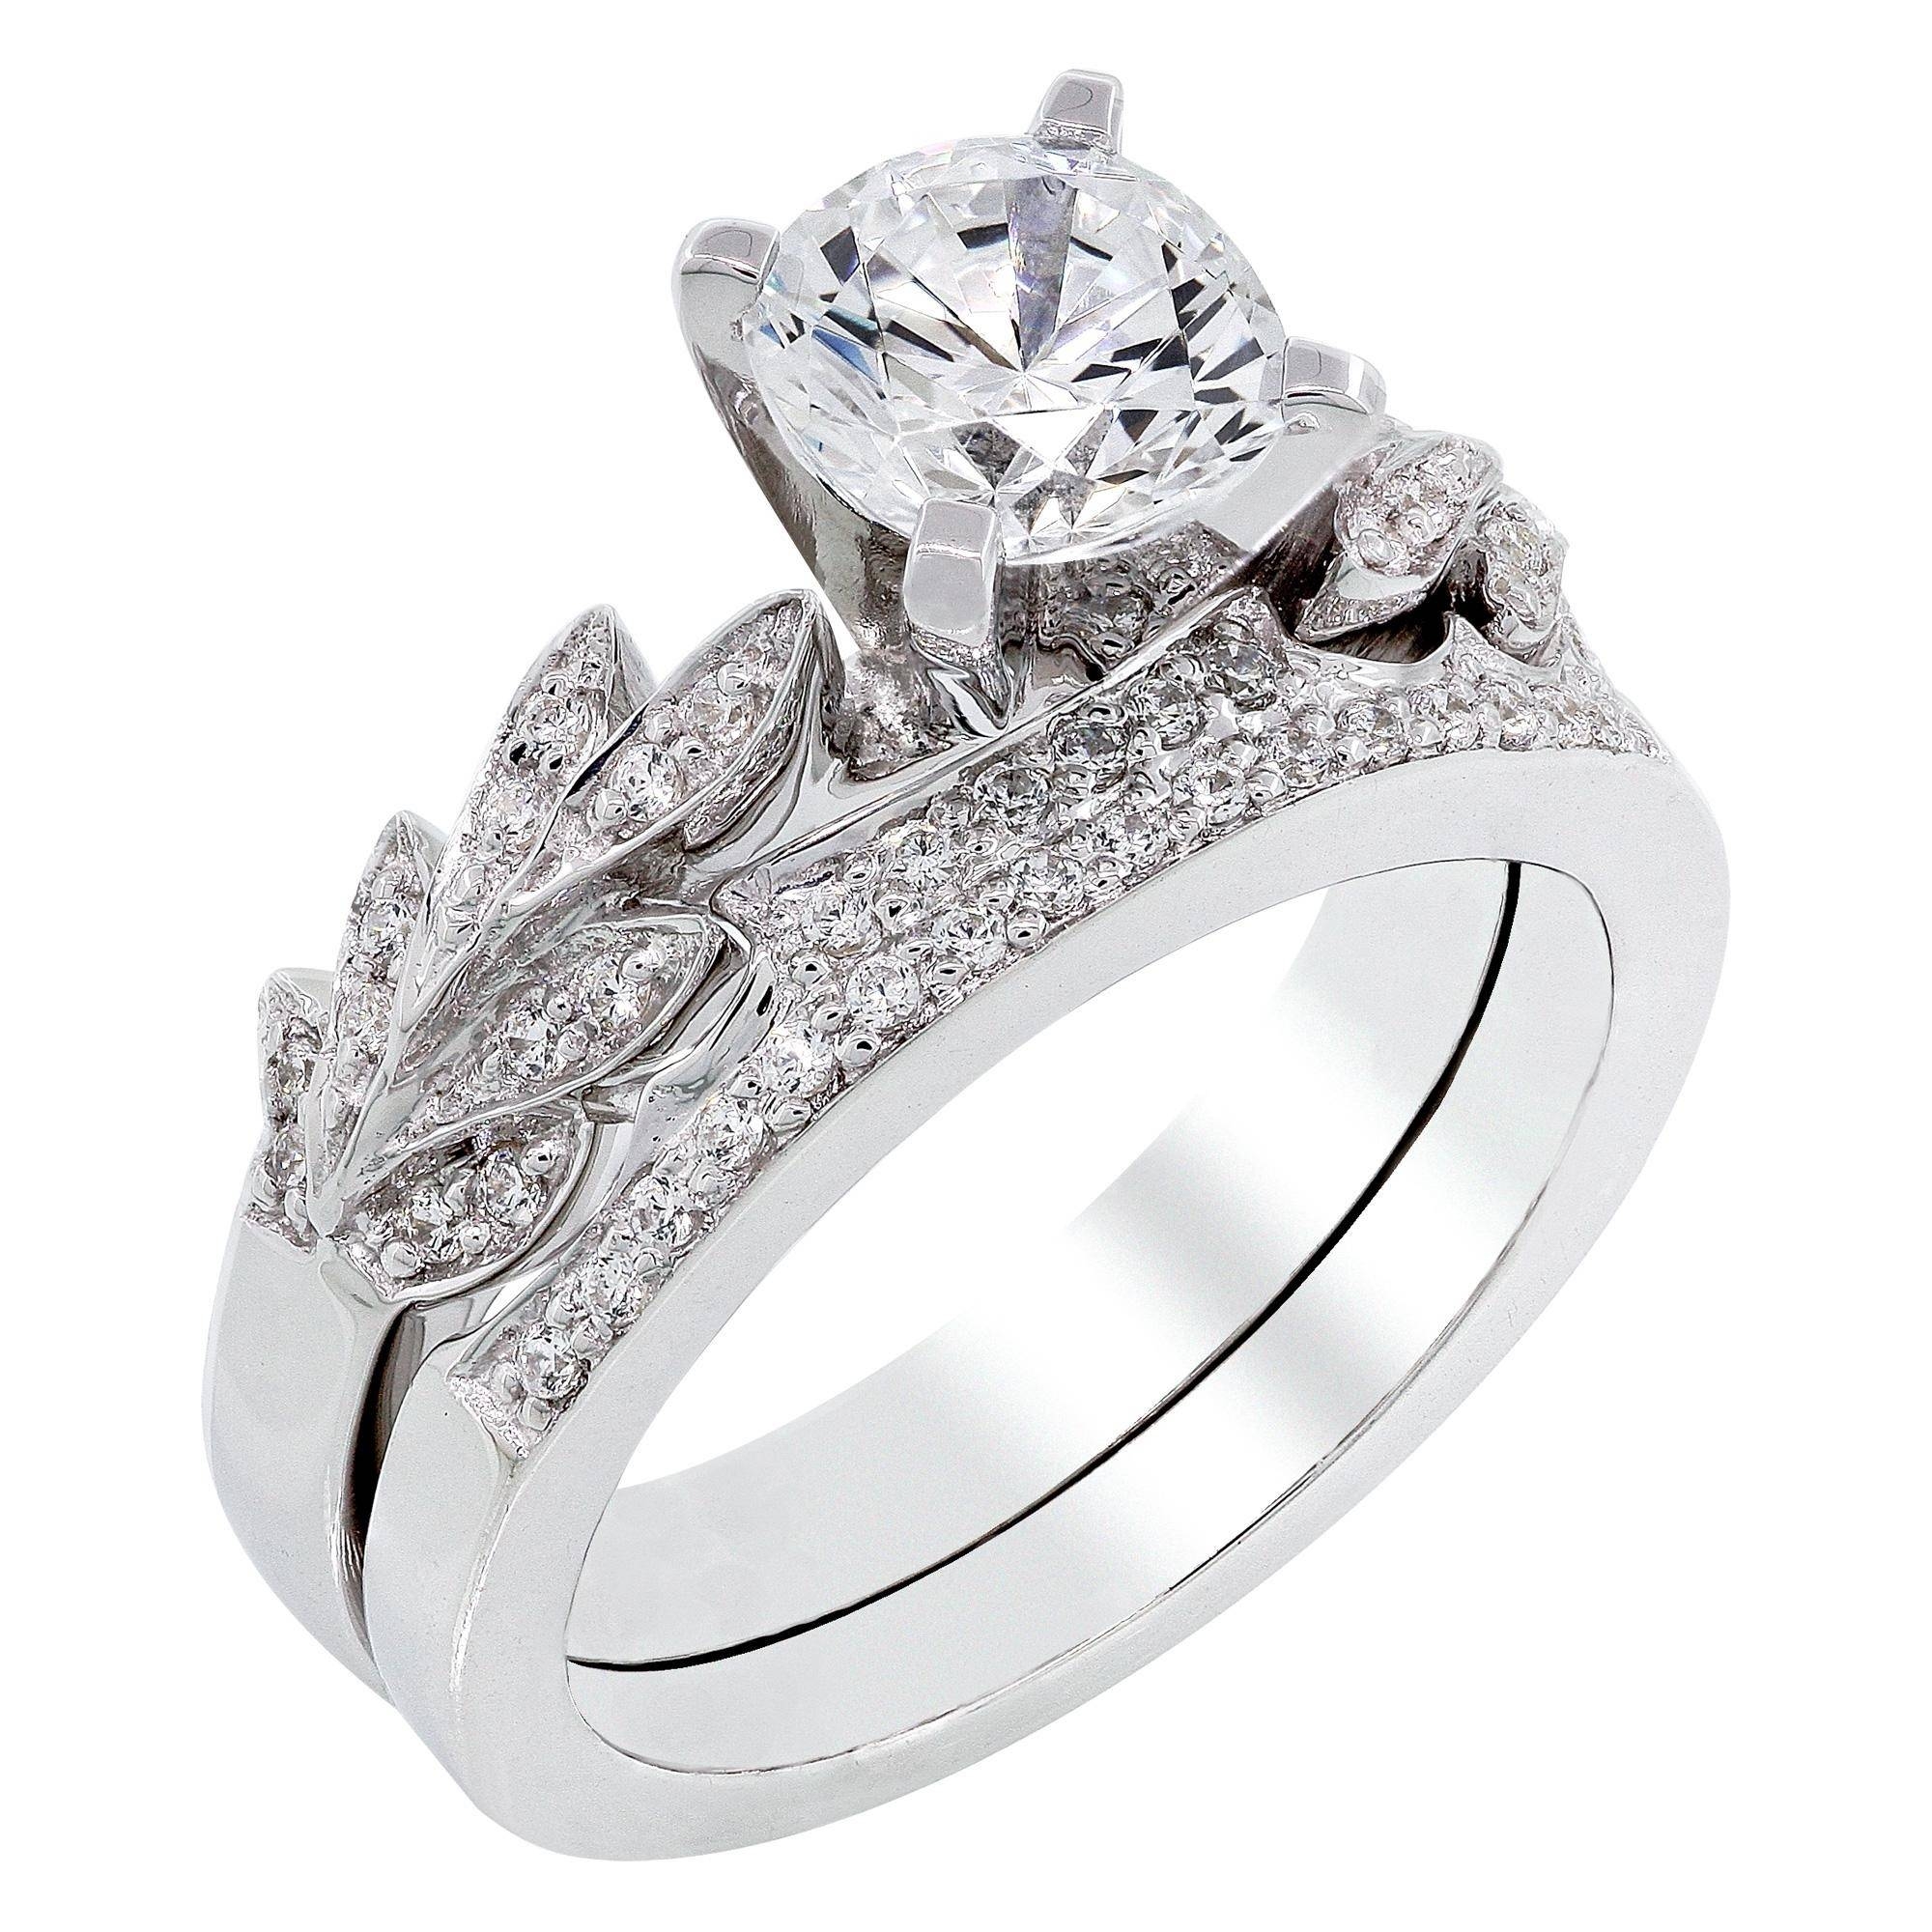 The 15 Best Collection of Sams Club Wedding Bands